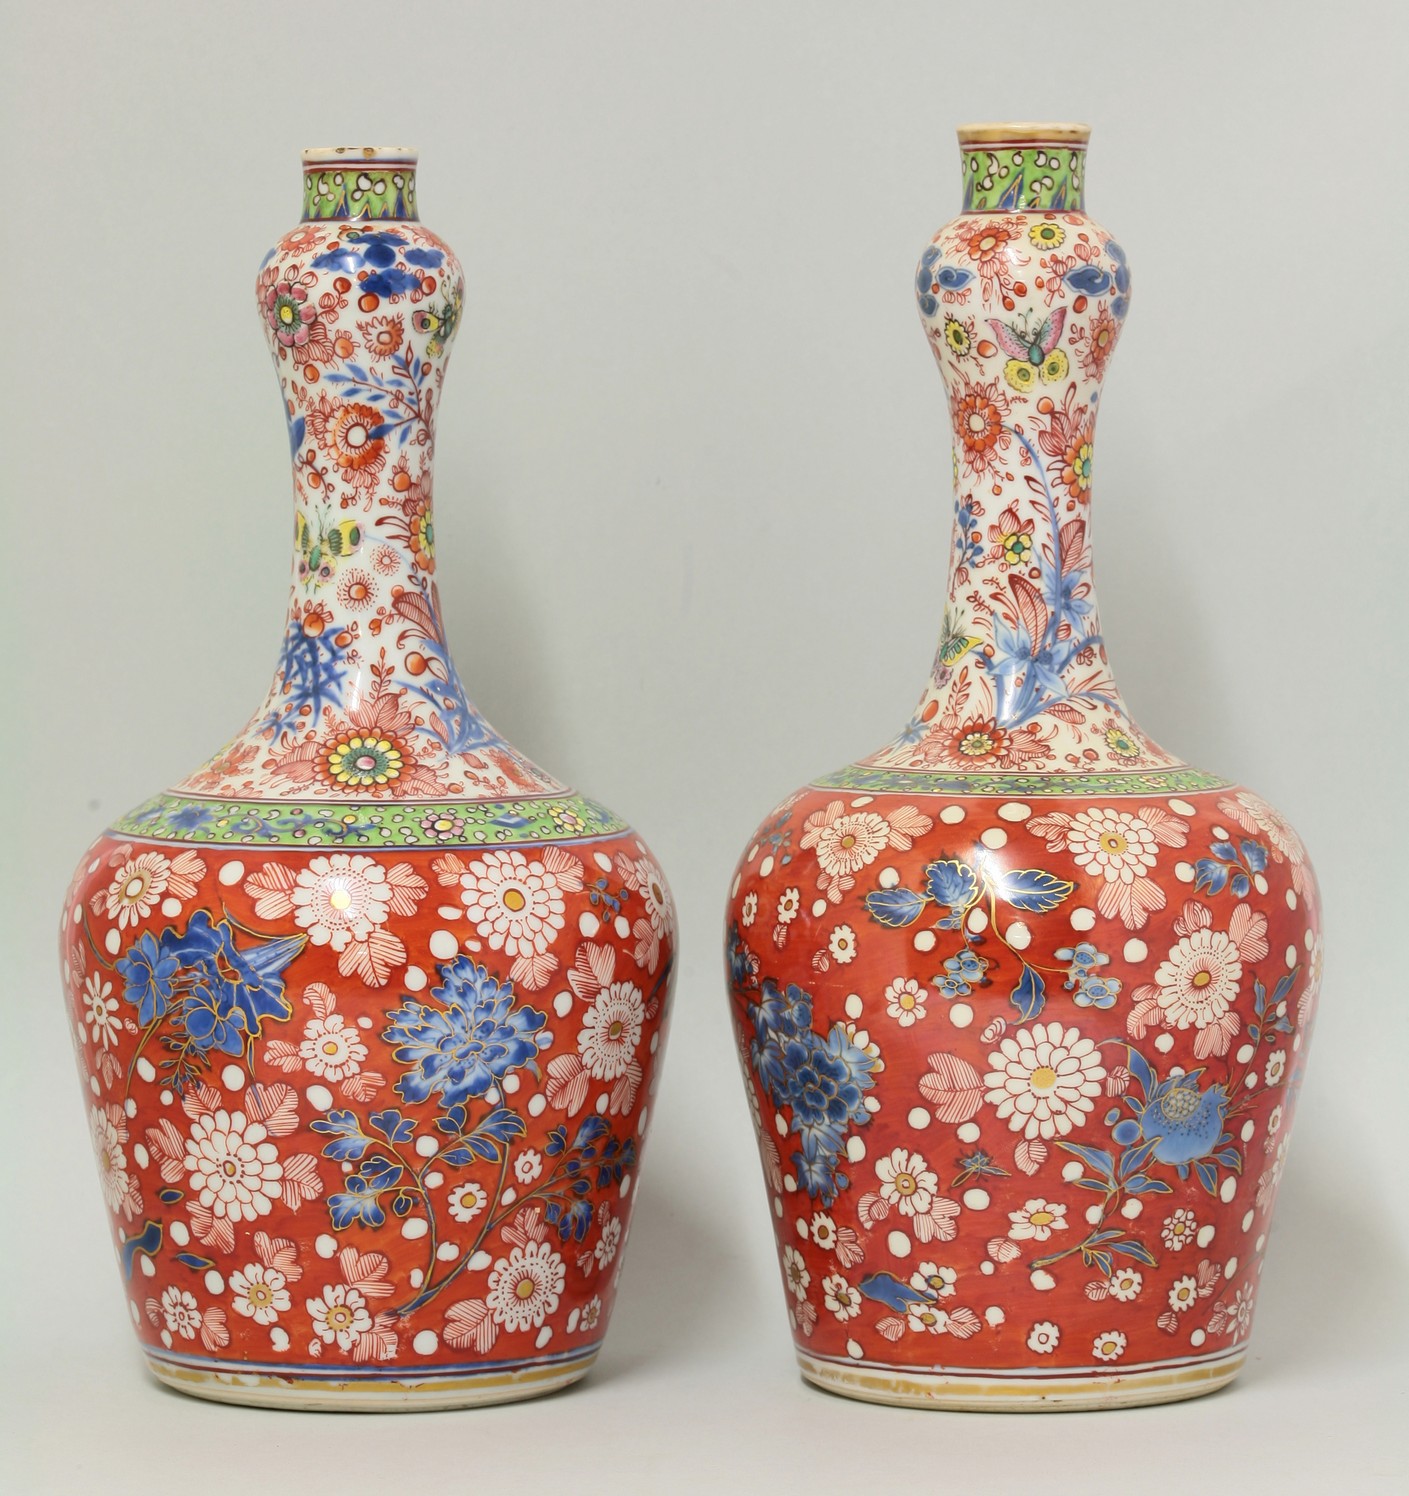 A pair of clobbered mallet-form Vases,
Kangxi and possibly c.1780, the bodies painted with